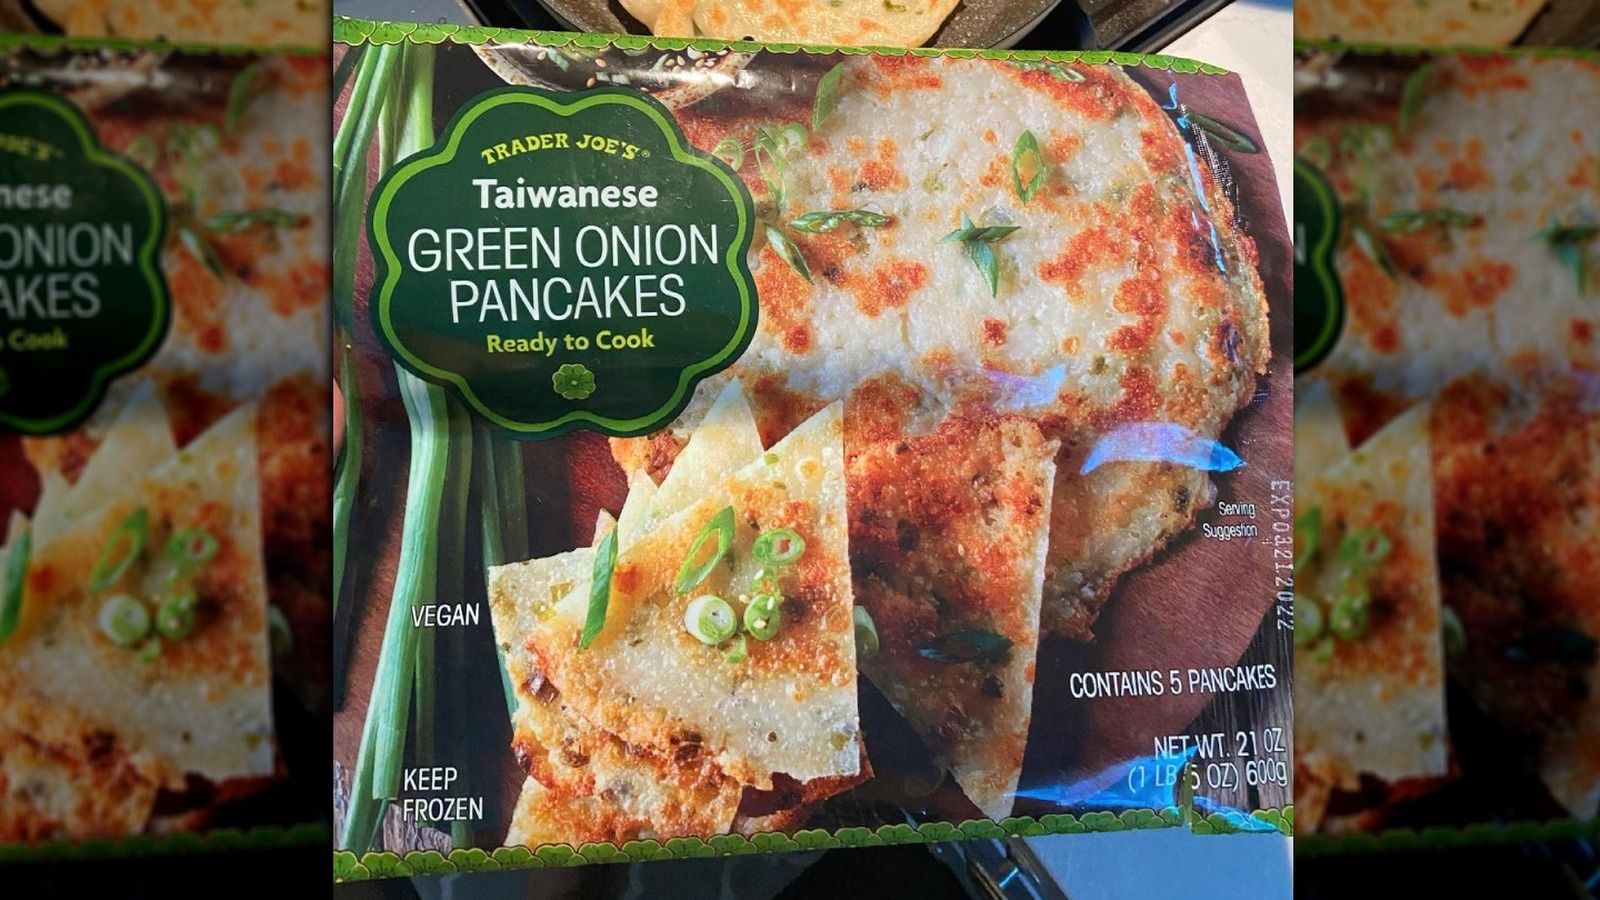 Trader Joe's Fans Are Loving Its New Taiwanese Green Onion Pancakes